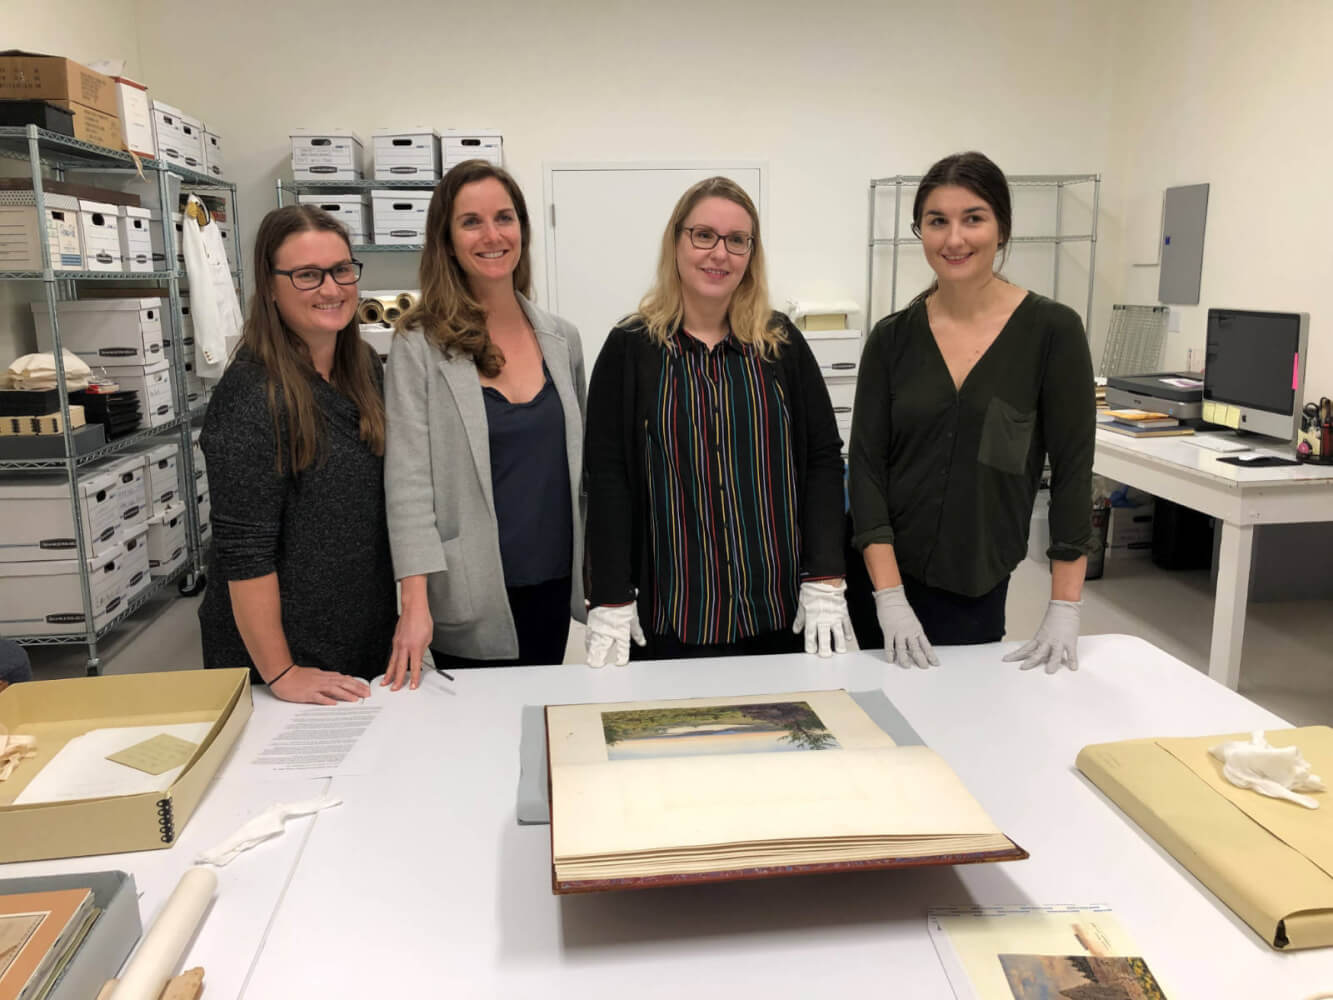 (L-R) Dr Deborah Atwood, Curator, National Museum of Bermuda (NMB); Elena Strong, Executive Director (NMB); Leeanne Westwood, Curator, Valence House Museum; Dr Zoe Brady, Conservator (NMB) at the National Museum of Bermuda.  ©Leeanne Westwood / Valence House Museum